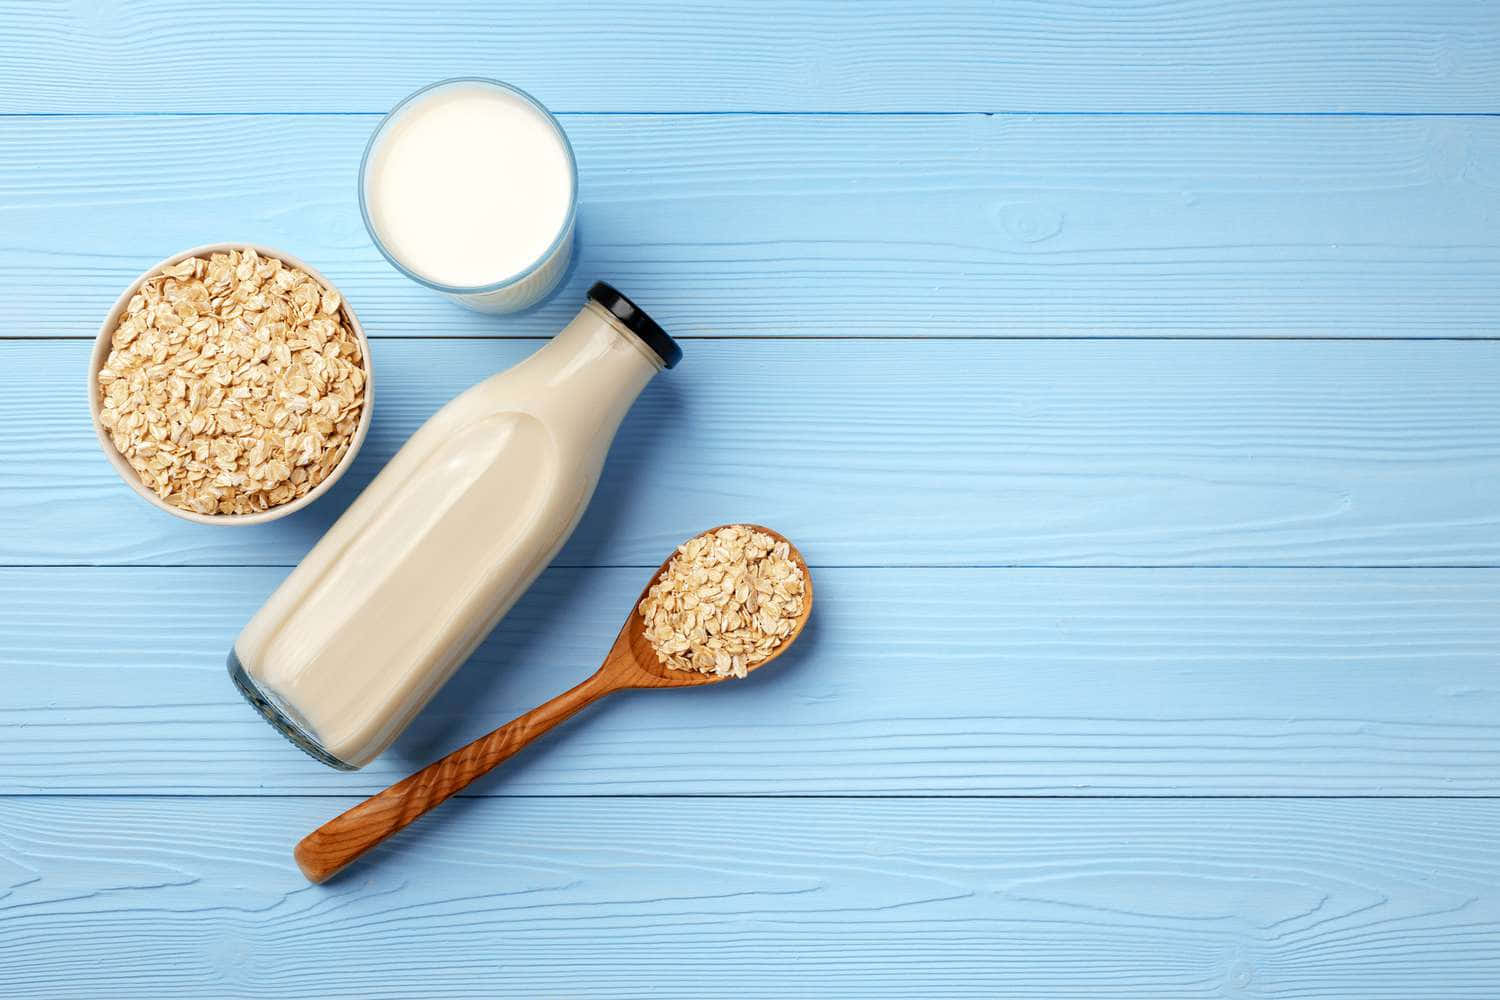 Milk, Oats And Spoons On A Blue Wooden Table